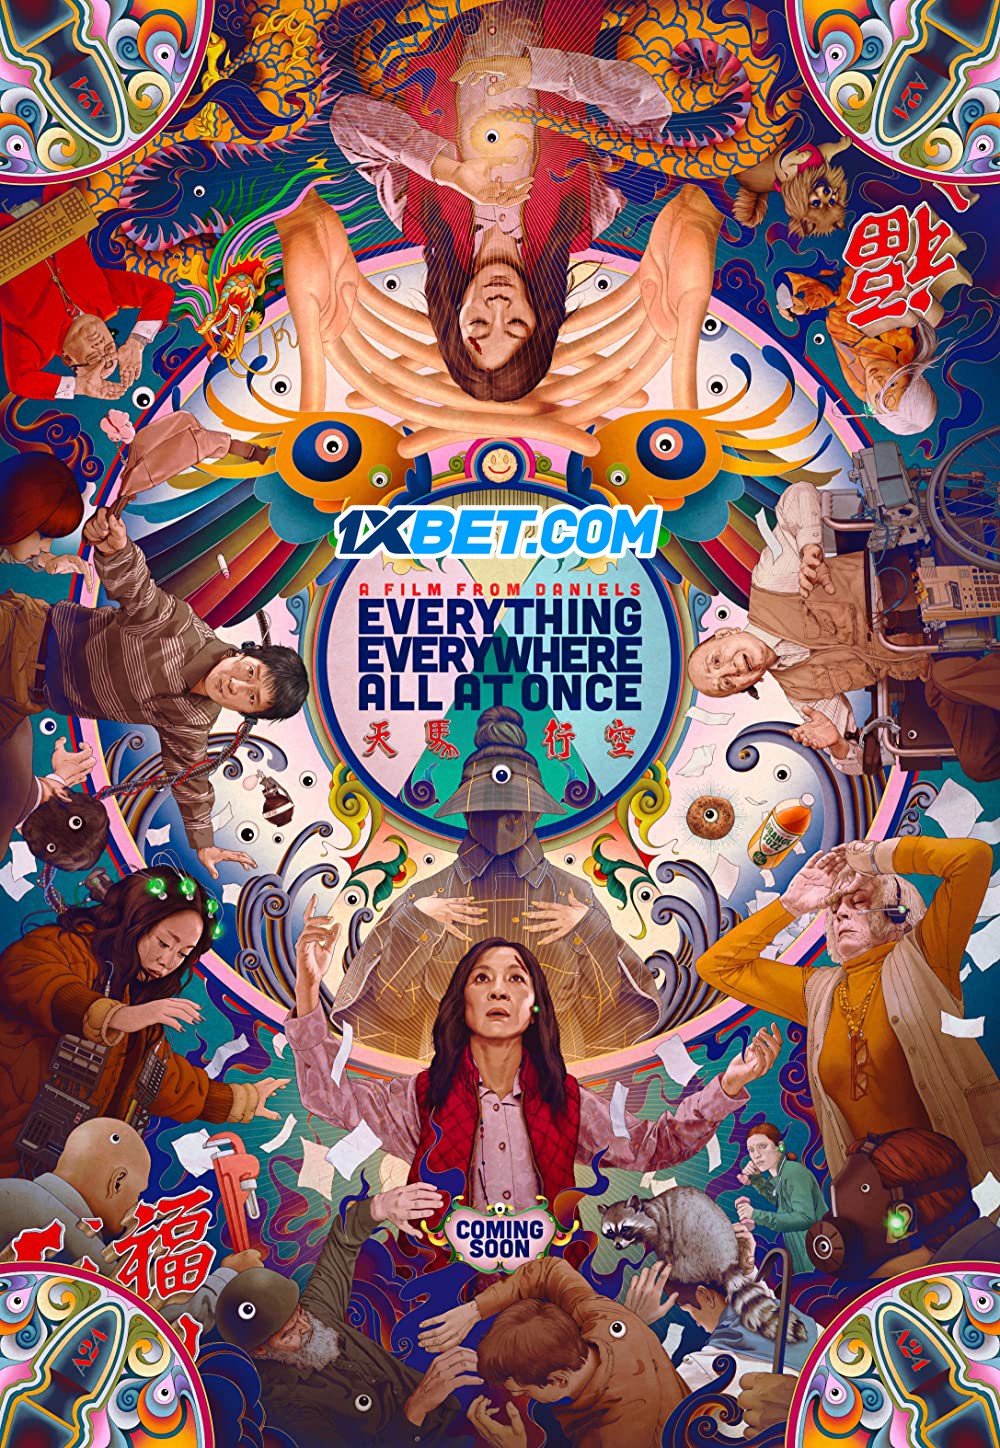 Everything Everywhere All at Once (2022) Bengali Dubbed (VO) [1XBET] 720p WEBRip Online Stream